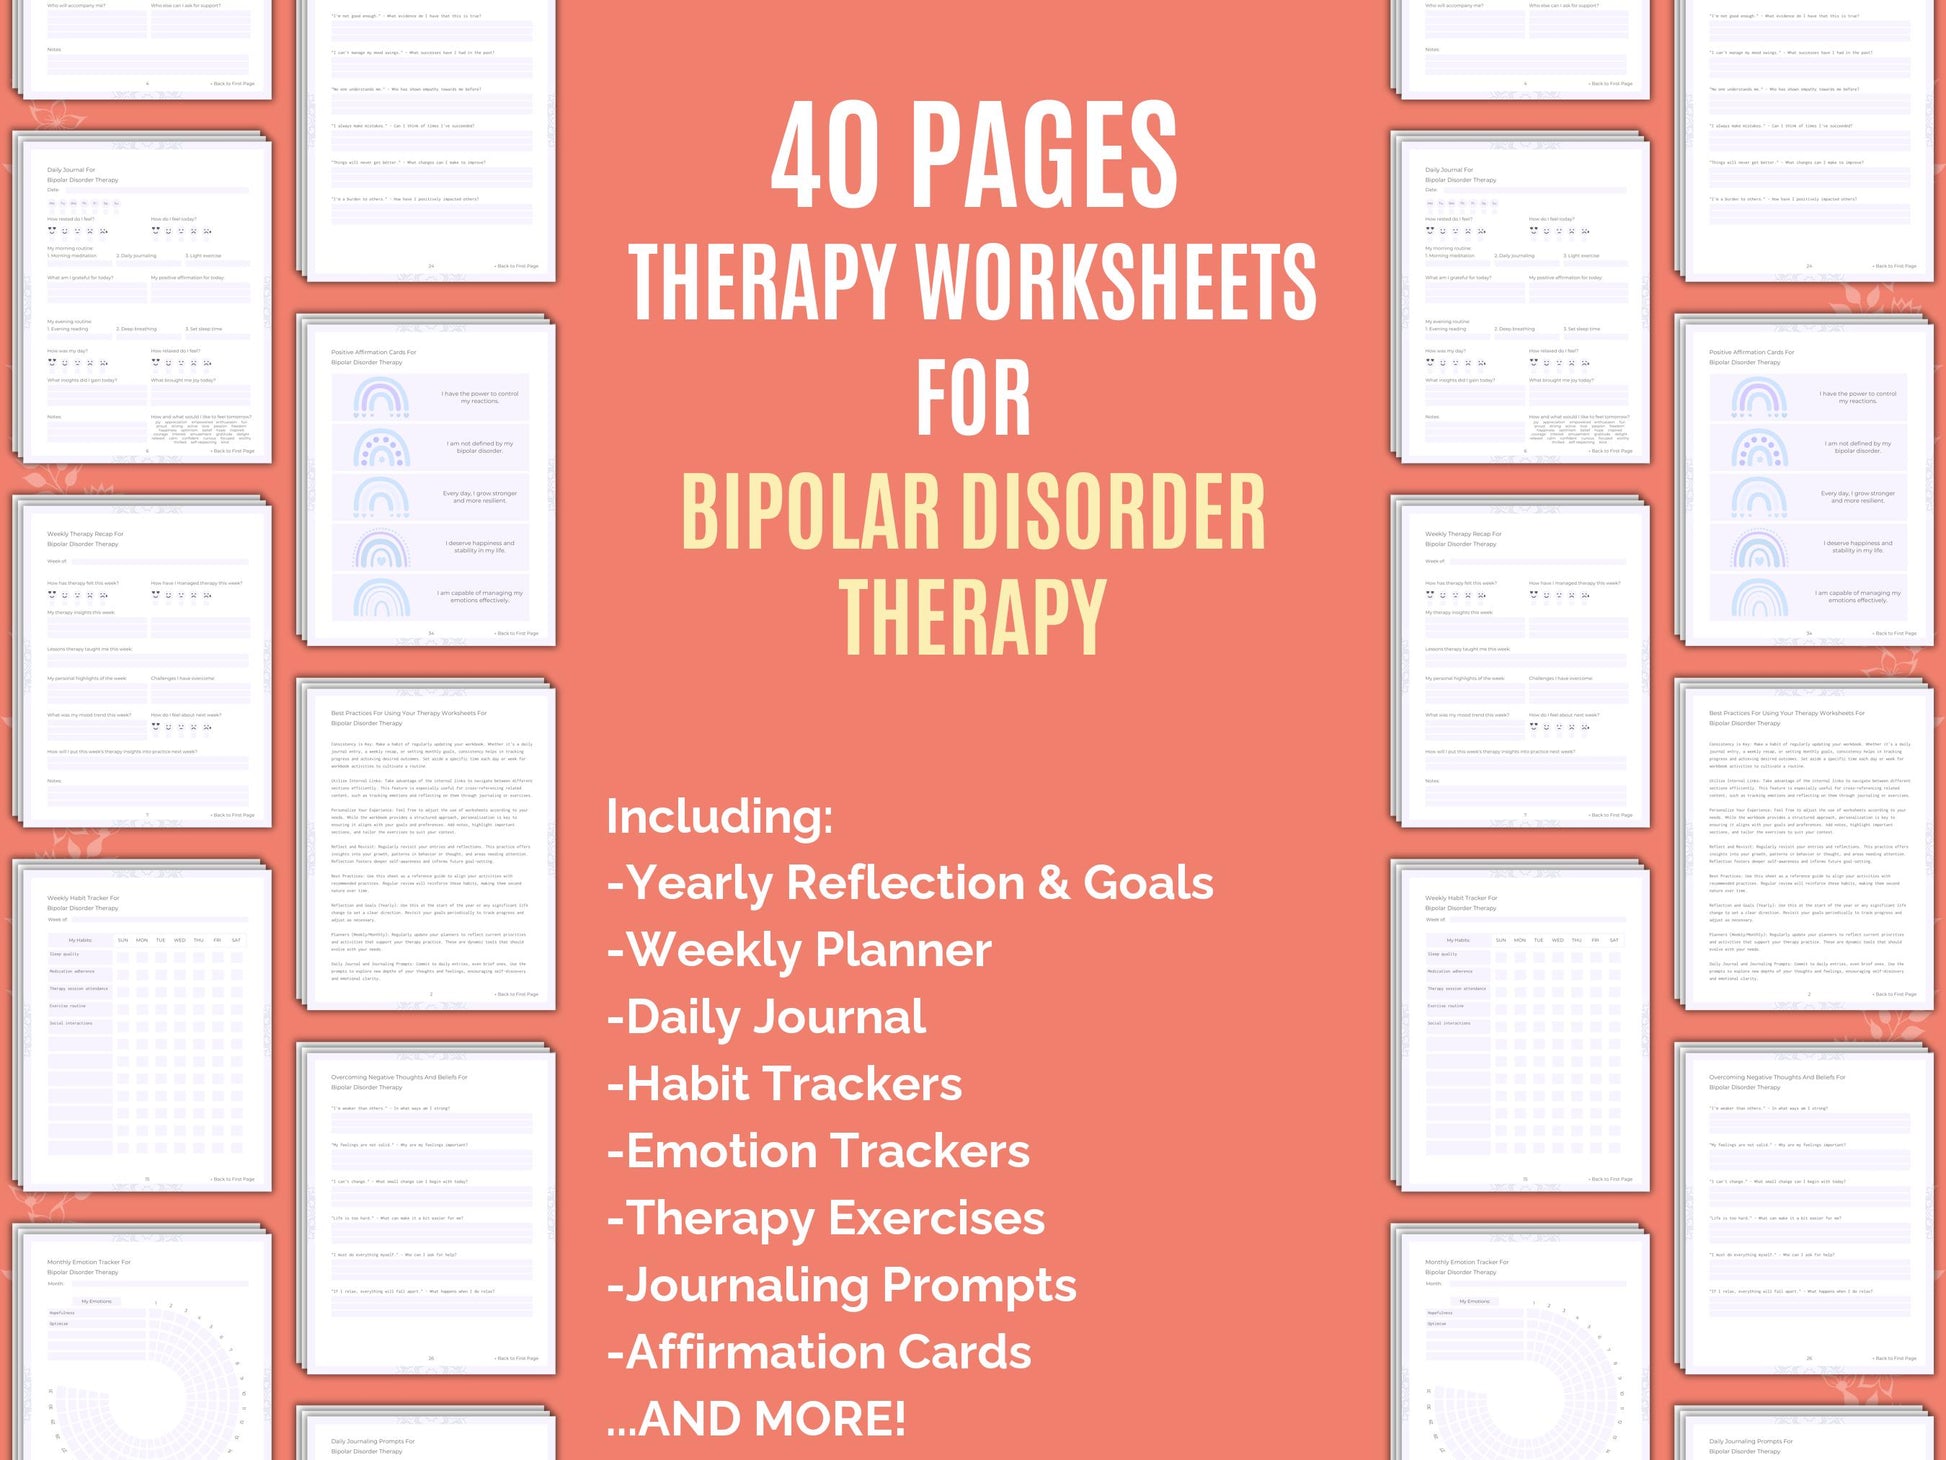 Therapy, Notes, Bipolar Disorder Therapy, Goal Setting, Workbooks, Journaling, Planners, Resources, Tools, Cheat Sheet, Counseling, Templates, Journals